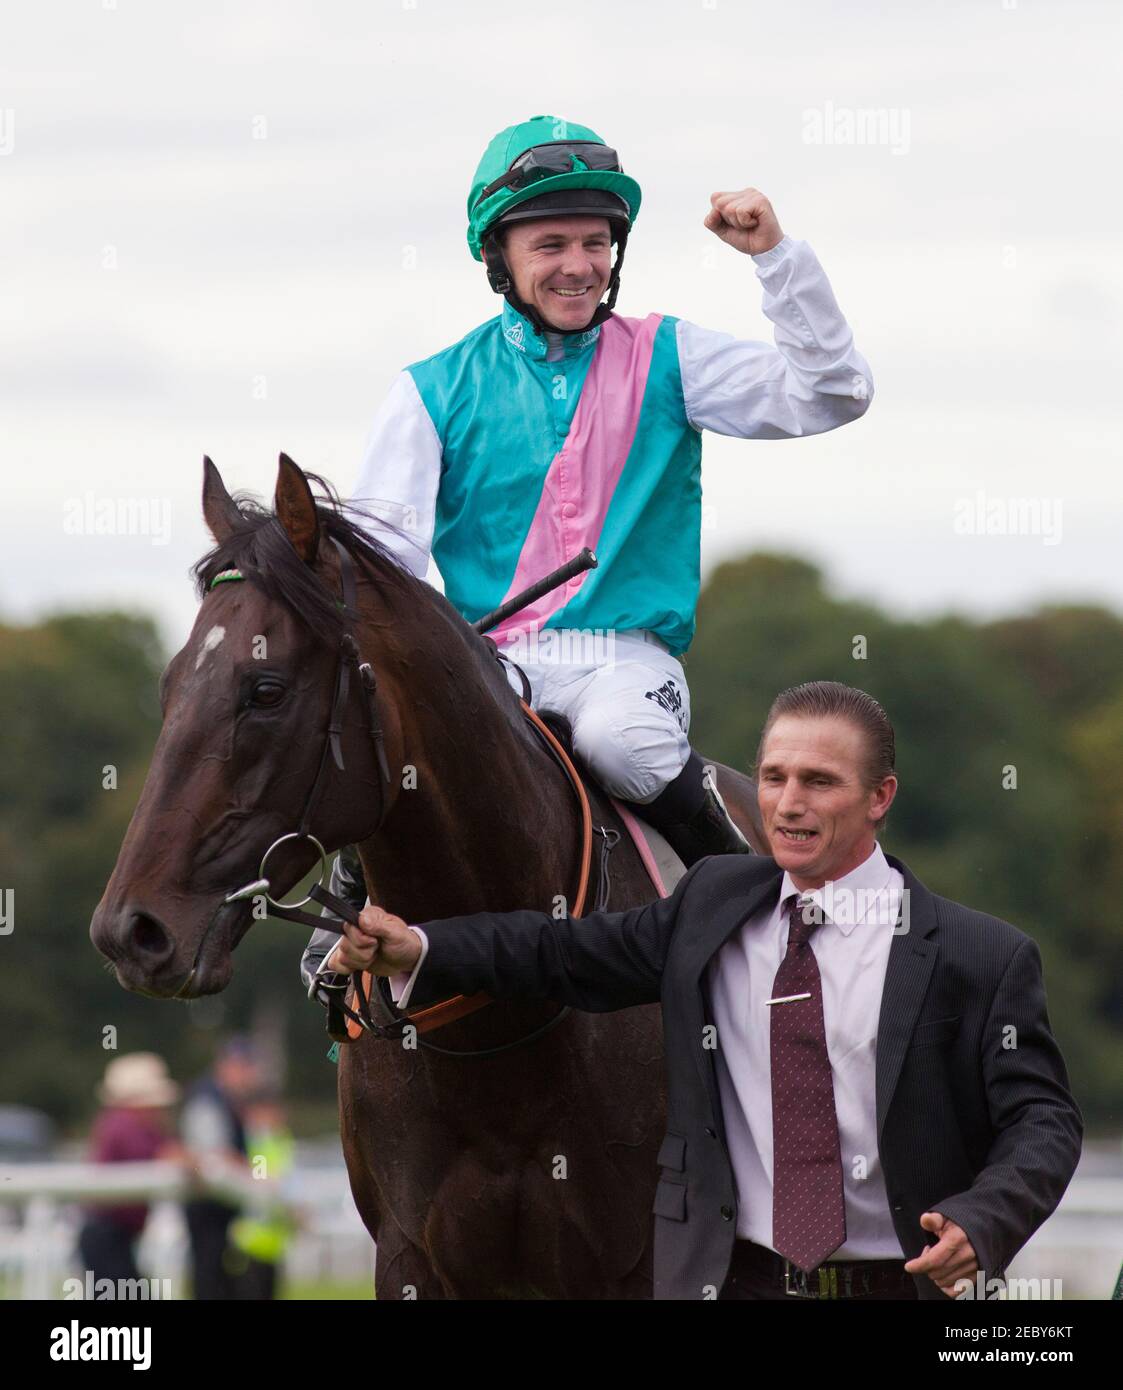 Horse Racing - York Ebor Meeting  - York Racecourse - 17/8/11  Twice Over ridden by Ian Mongan after winning the 15.40, The Juddmonte International Stakes  Mandatory Credit: Action Images / Julian Herbert  Livepic Stock Photo